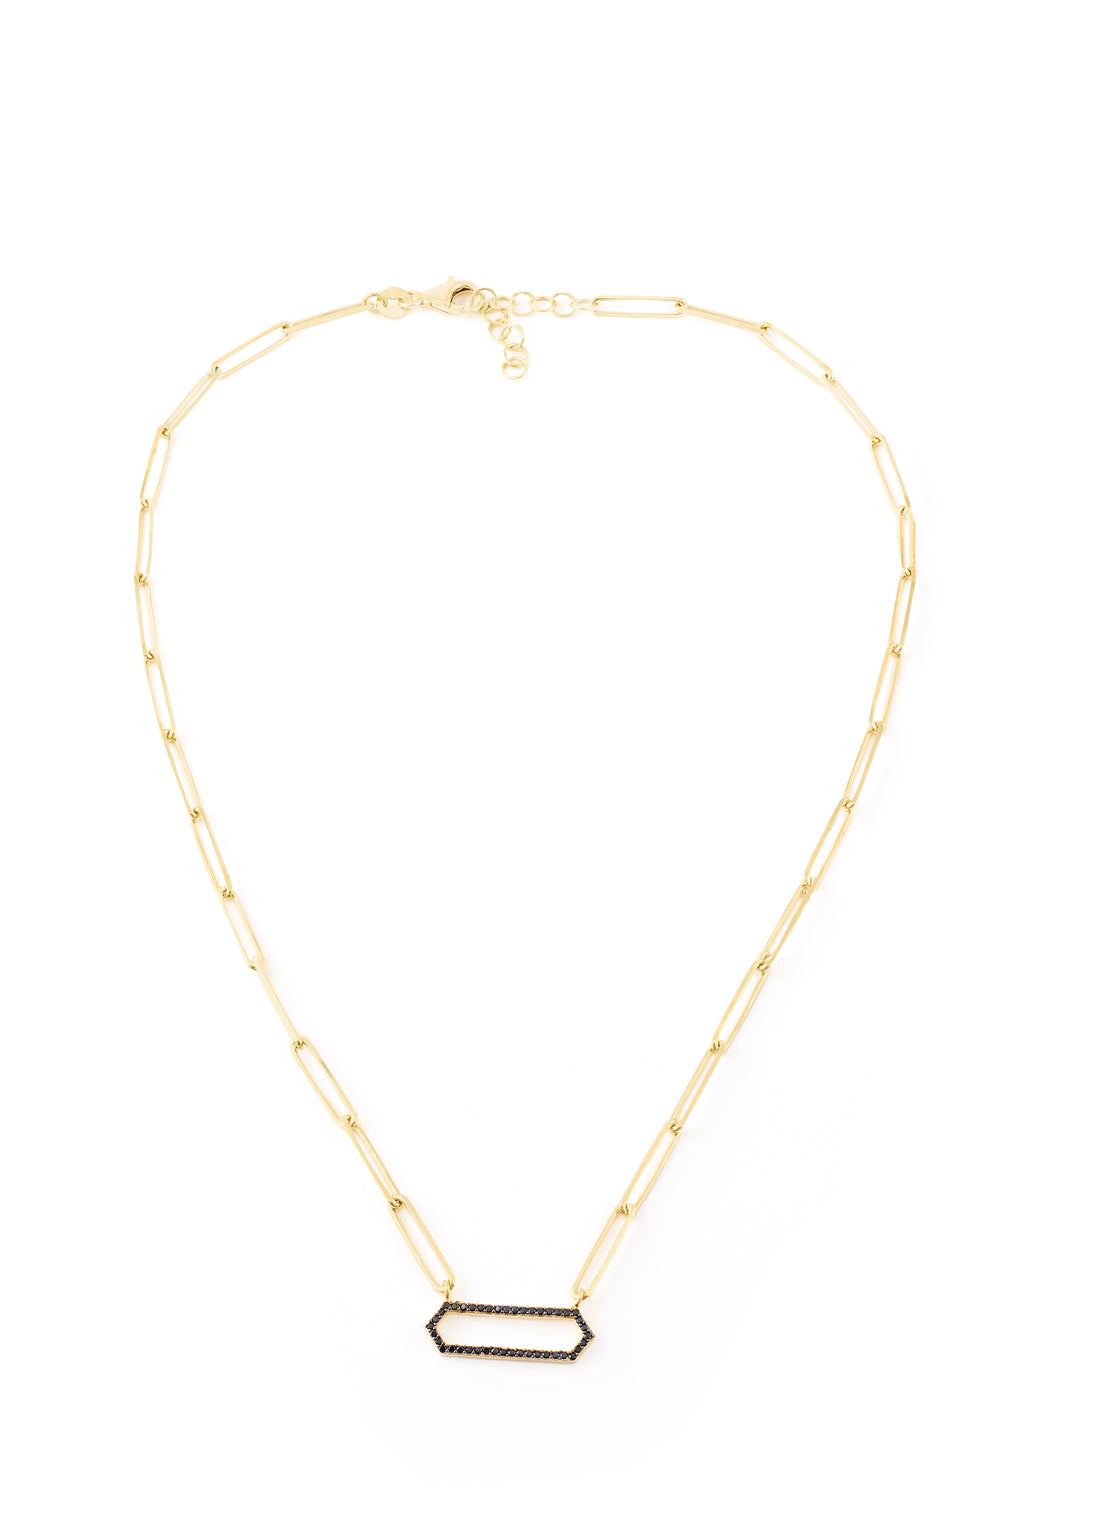 Gold Thin Rectangle Belcher with Black Pendant Chain - Jessimara